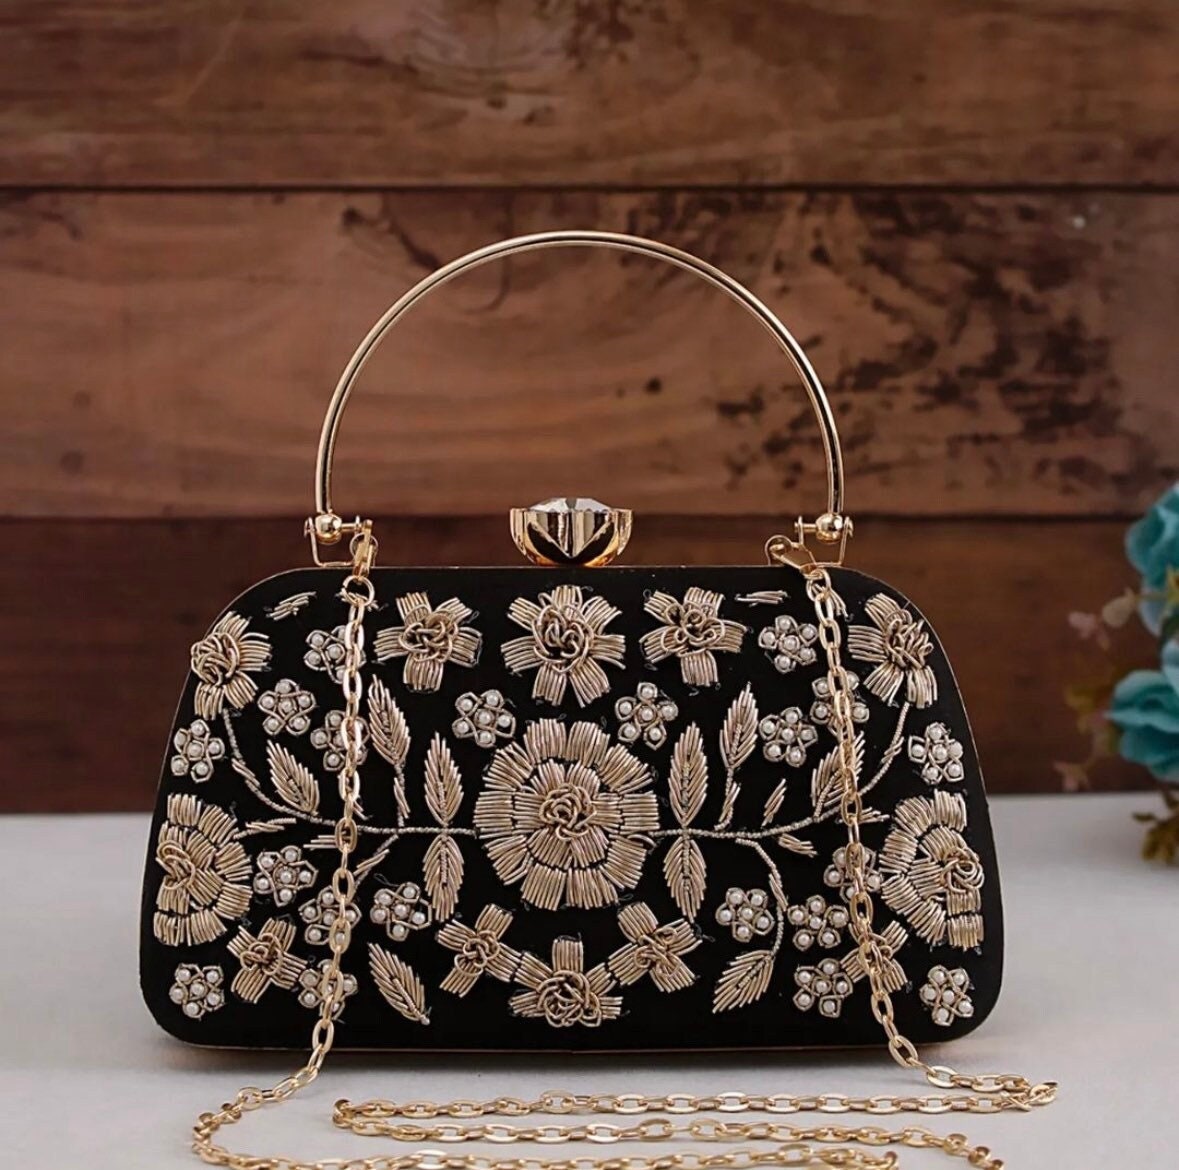 Beaded Purse In Jodhpur, Rajasthan At Best Price | Beaded Purse  Manufacturers, Suppliers In Jodhpur